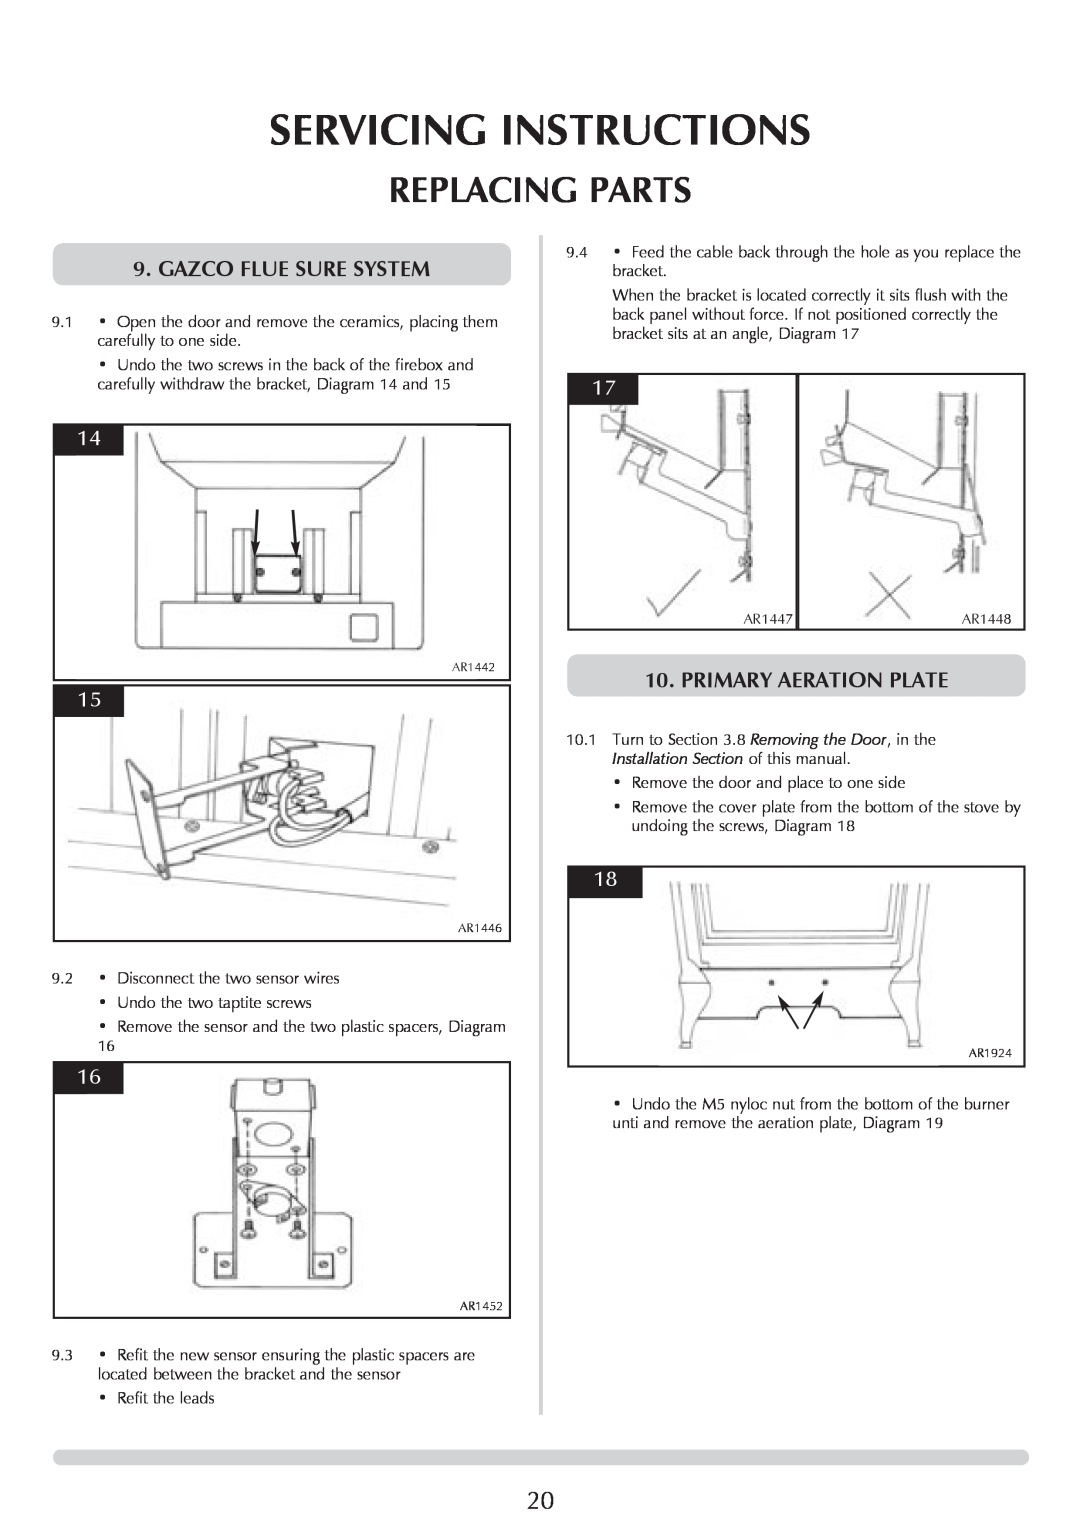 Stovax Huntingdon 30 manual Servicing Instructions, Replacing Parts, Gazco Flue Sure System, Primary Aeration Plate 